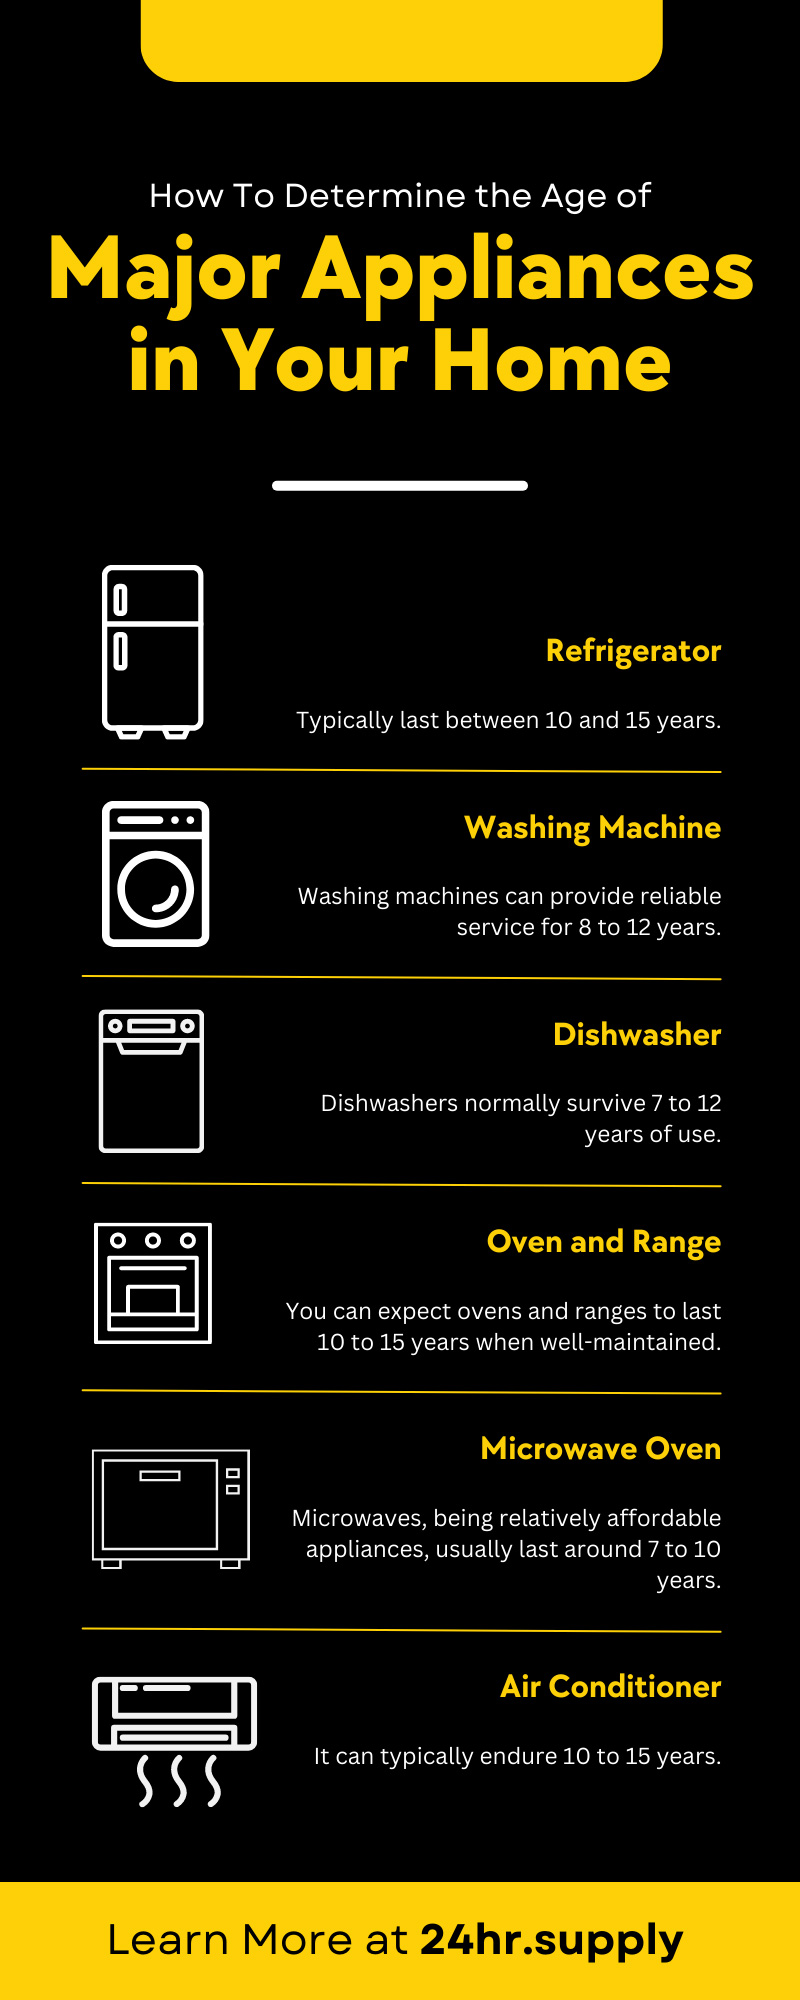 How To Determine the Age of Major Appliances in Your Home